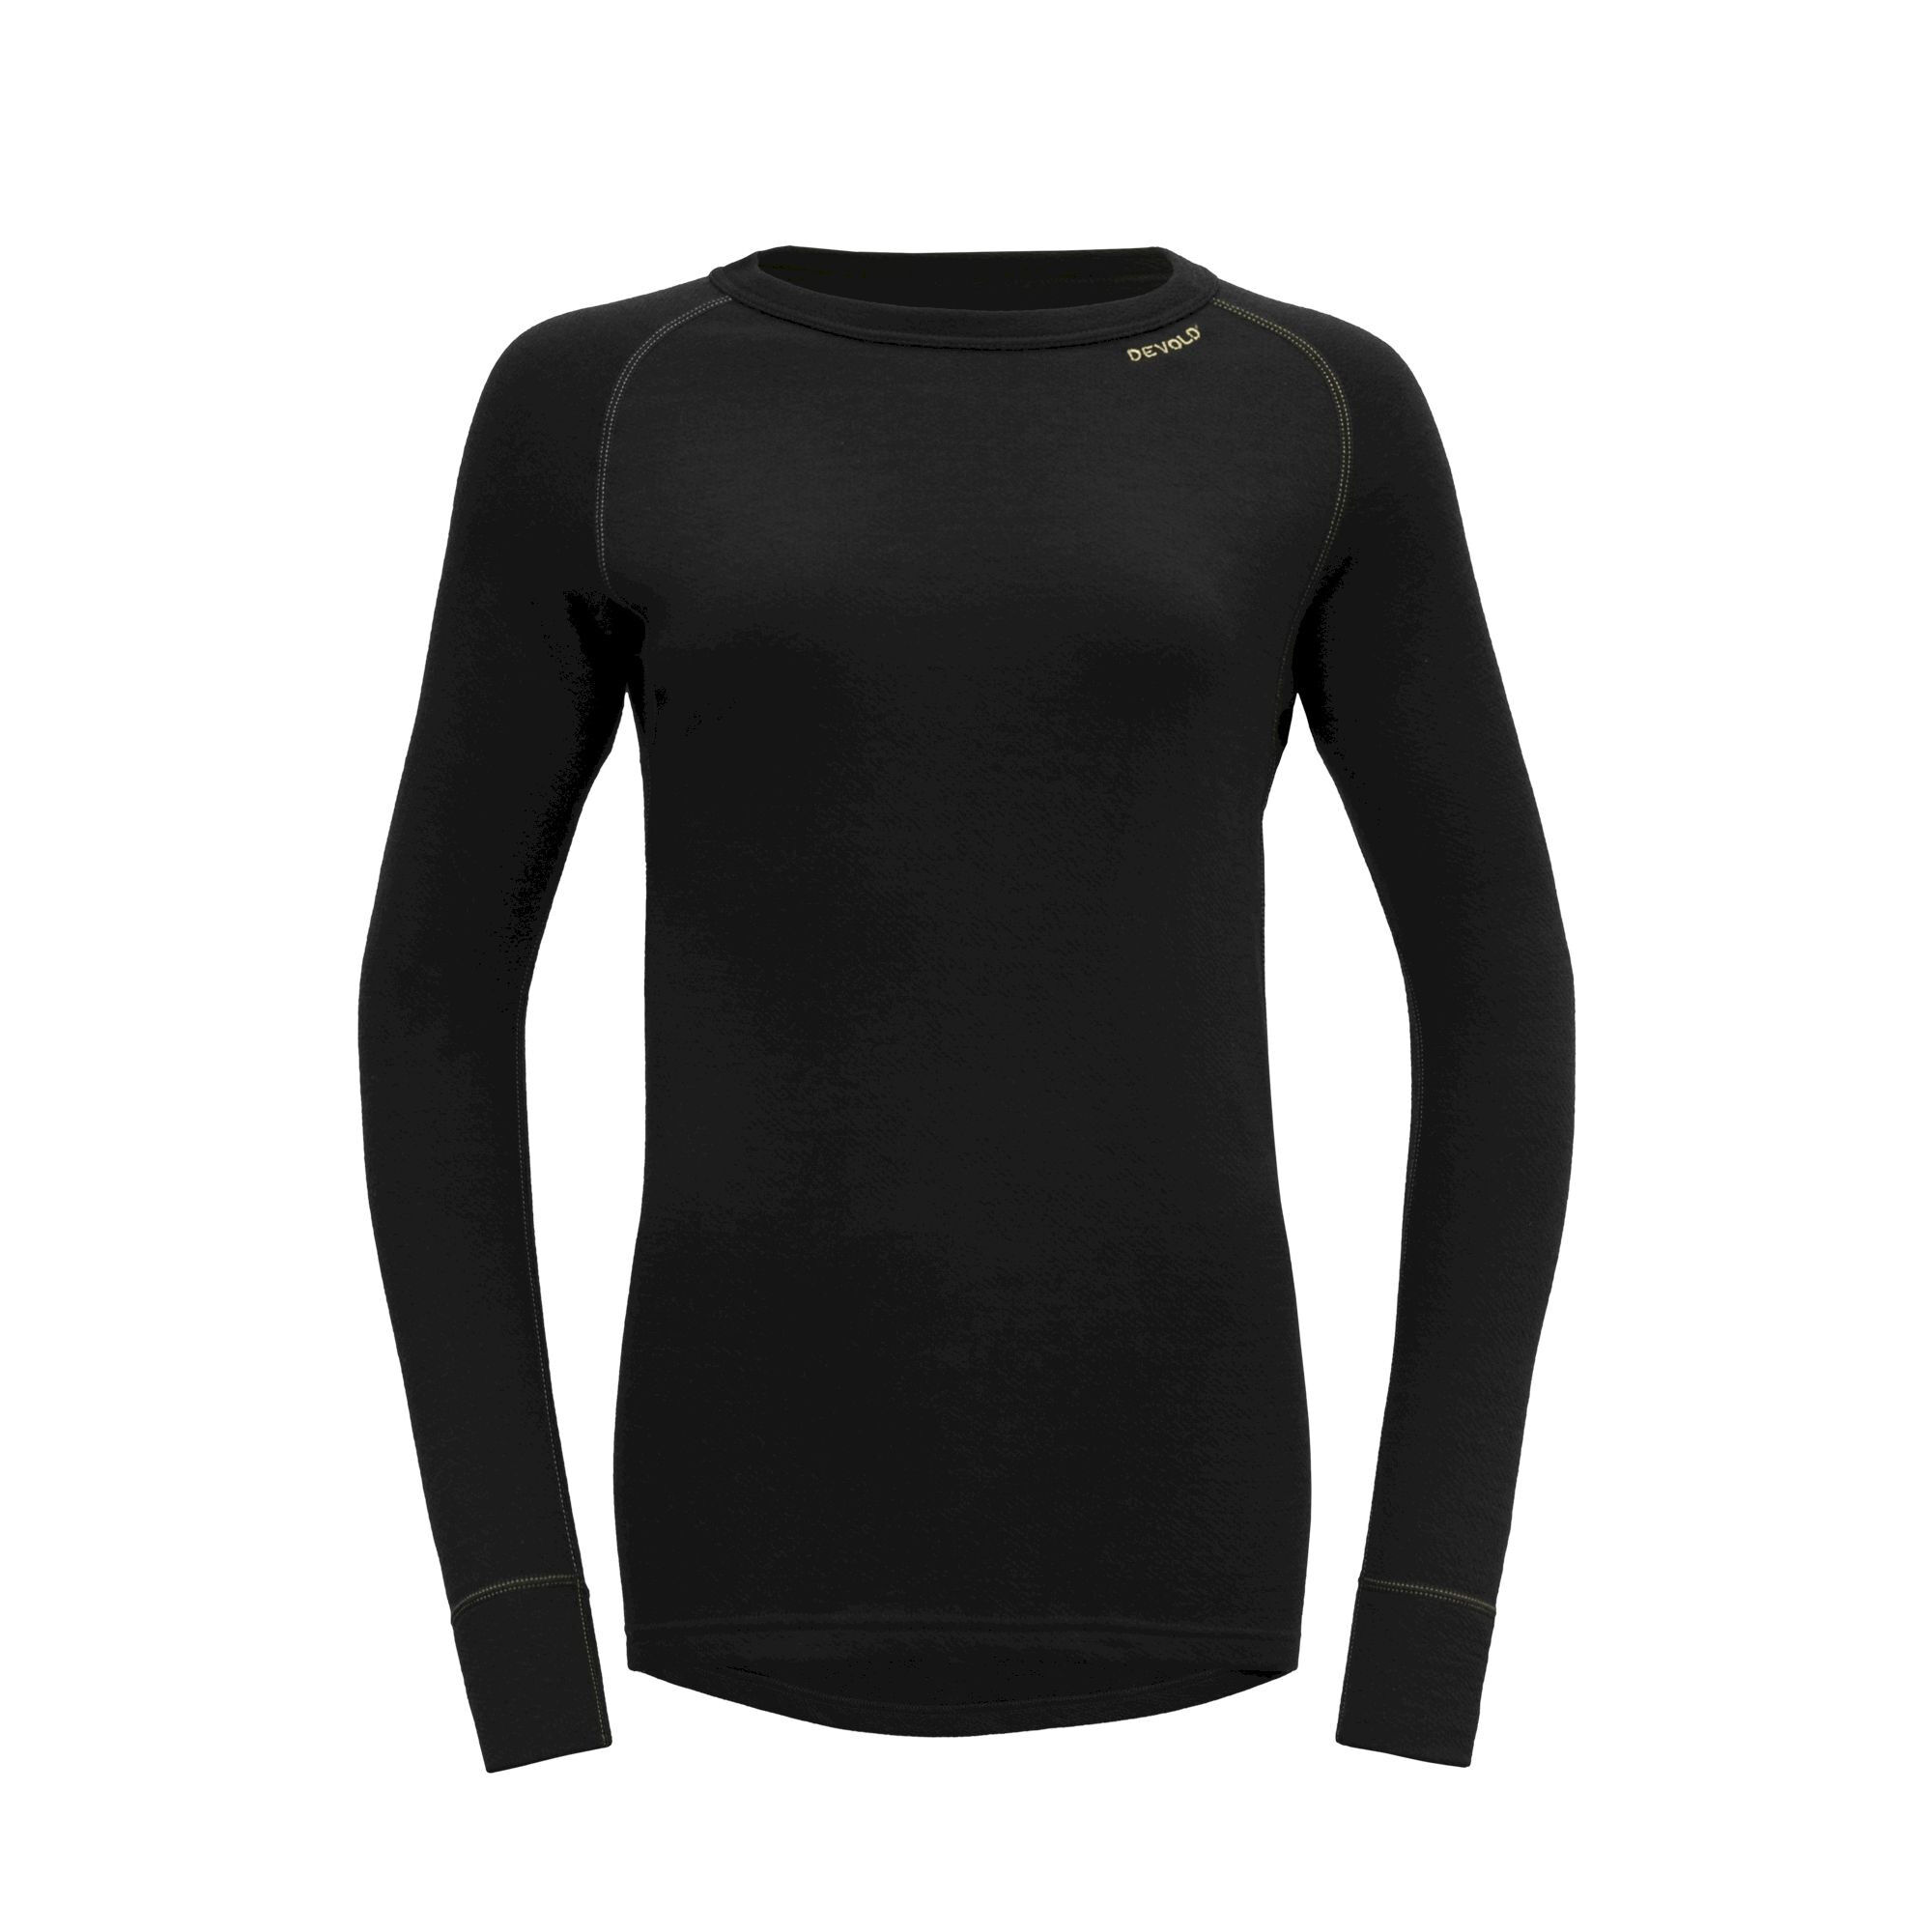 Devold Expedition - Base layer - Women's